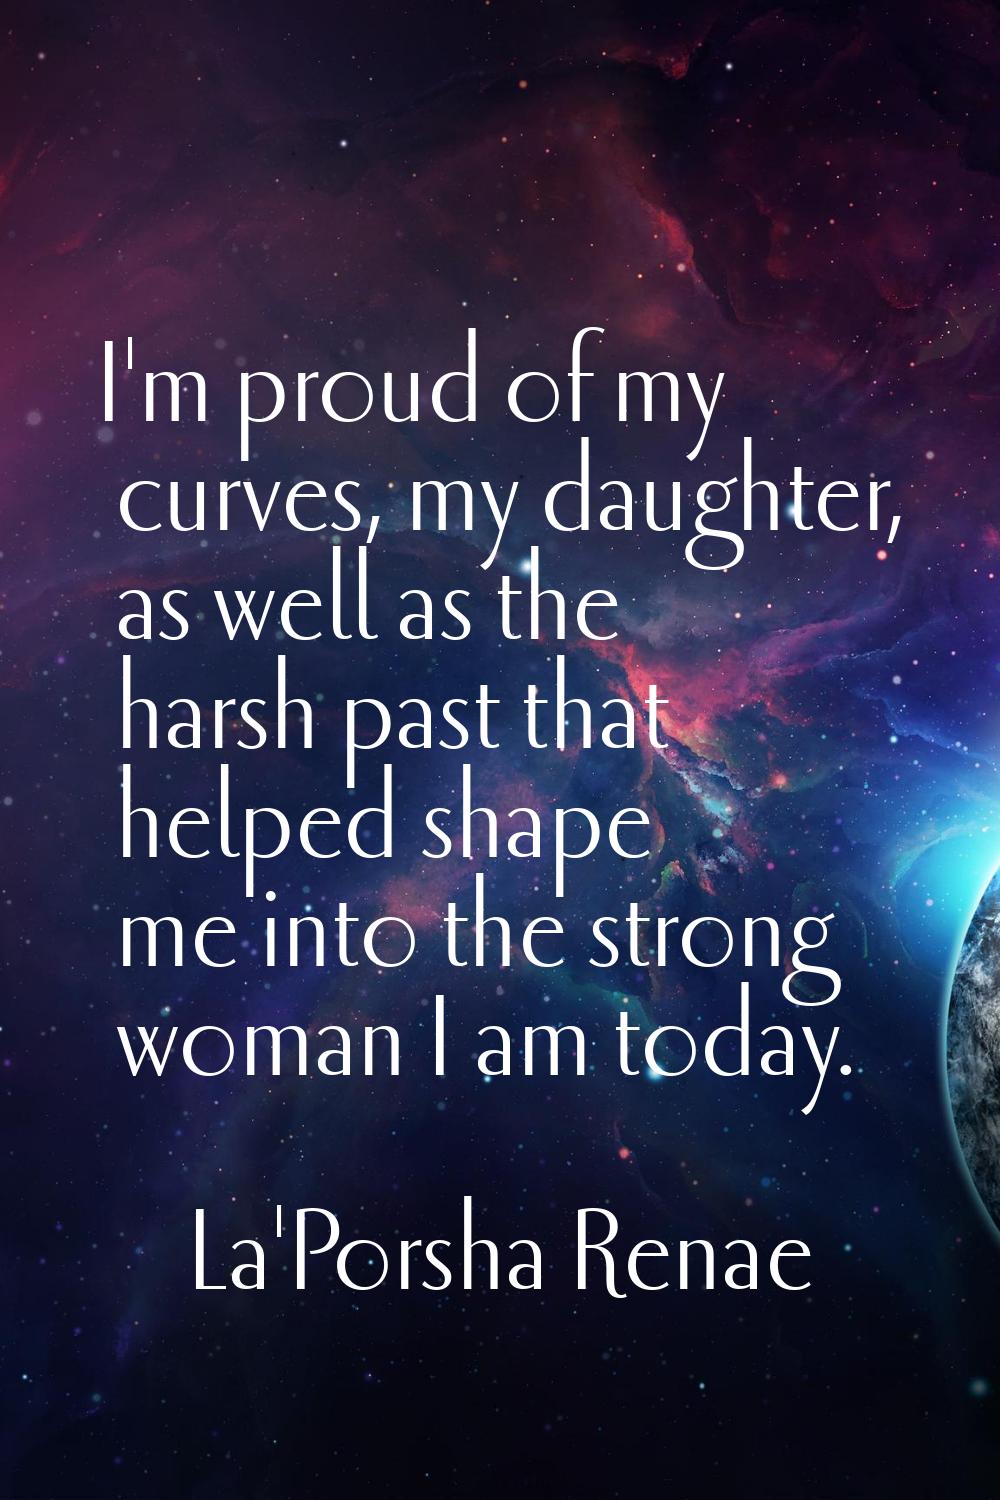 I'm proud of my curves, my daughter, as well as the harsh past that helped shape me into the strong